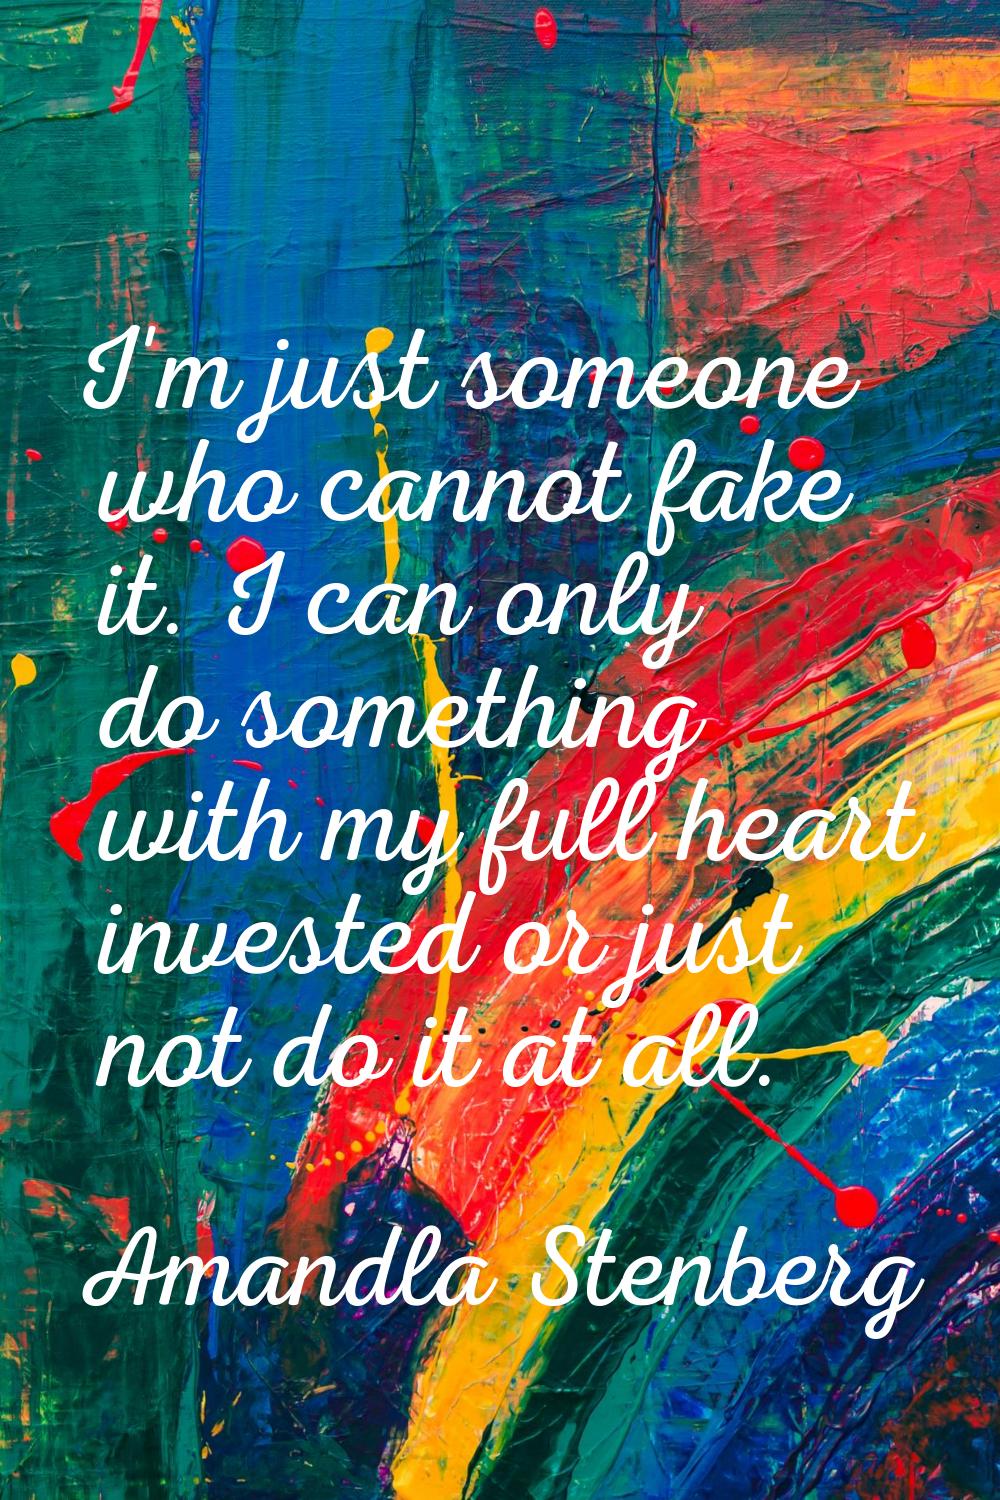 I'm just someone who cannot fake it. I can only do something with my full heart invested or just no